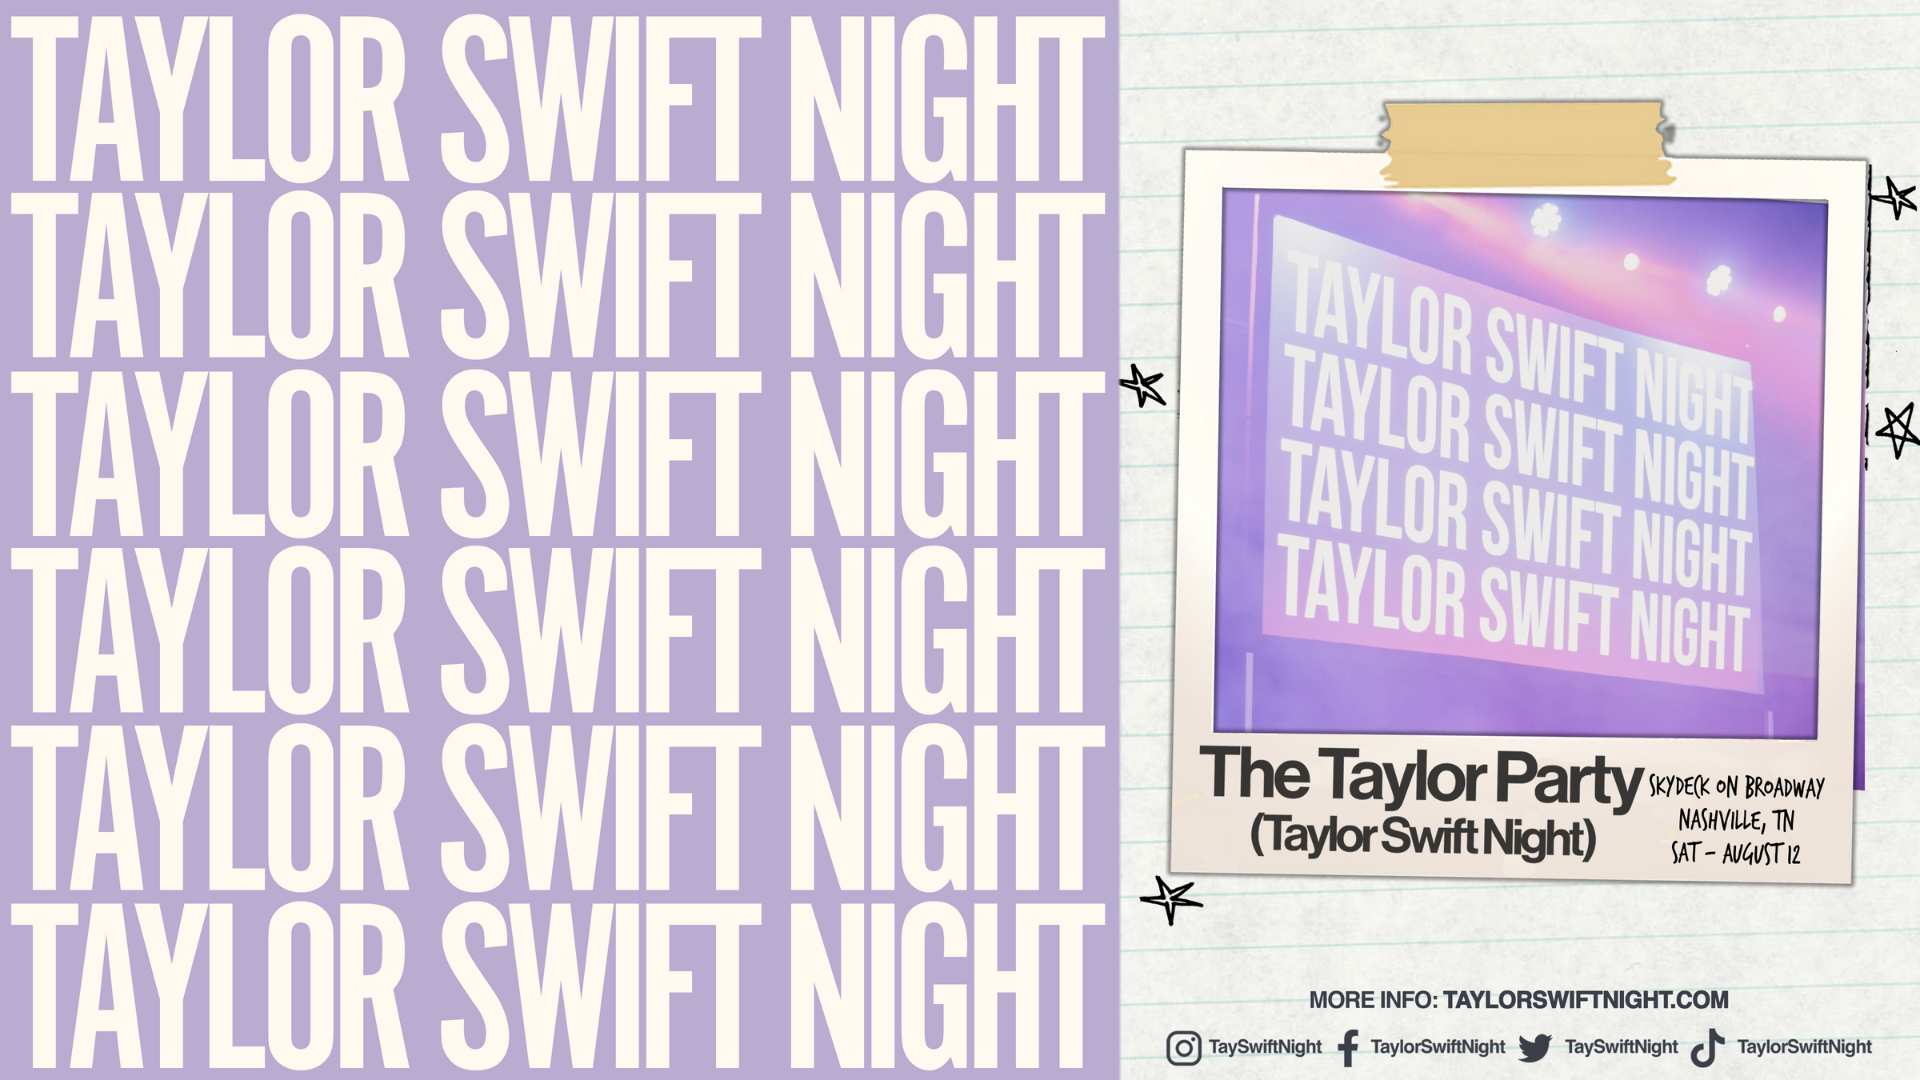 Promo image of The Taylor Party: Taylor Swift Night